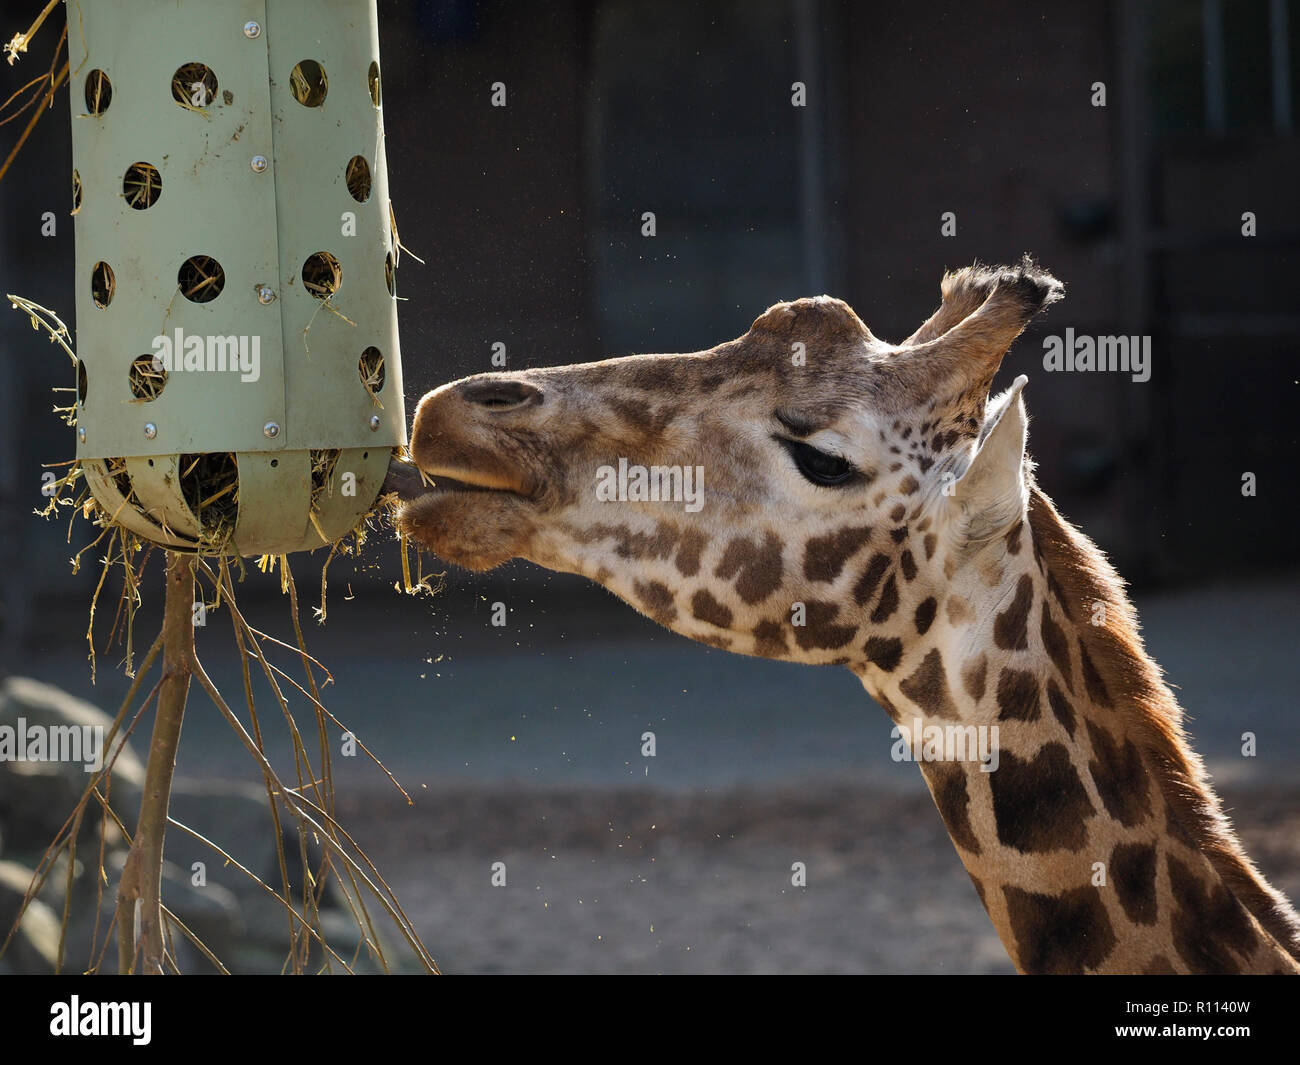 closeup of Giraffe eating, photographed in the Rhenen zoo, the Netherlands Stock Photo